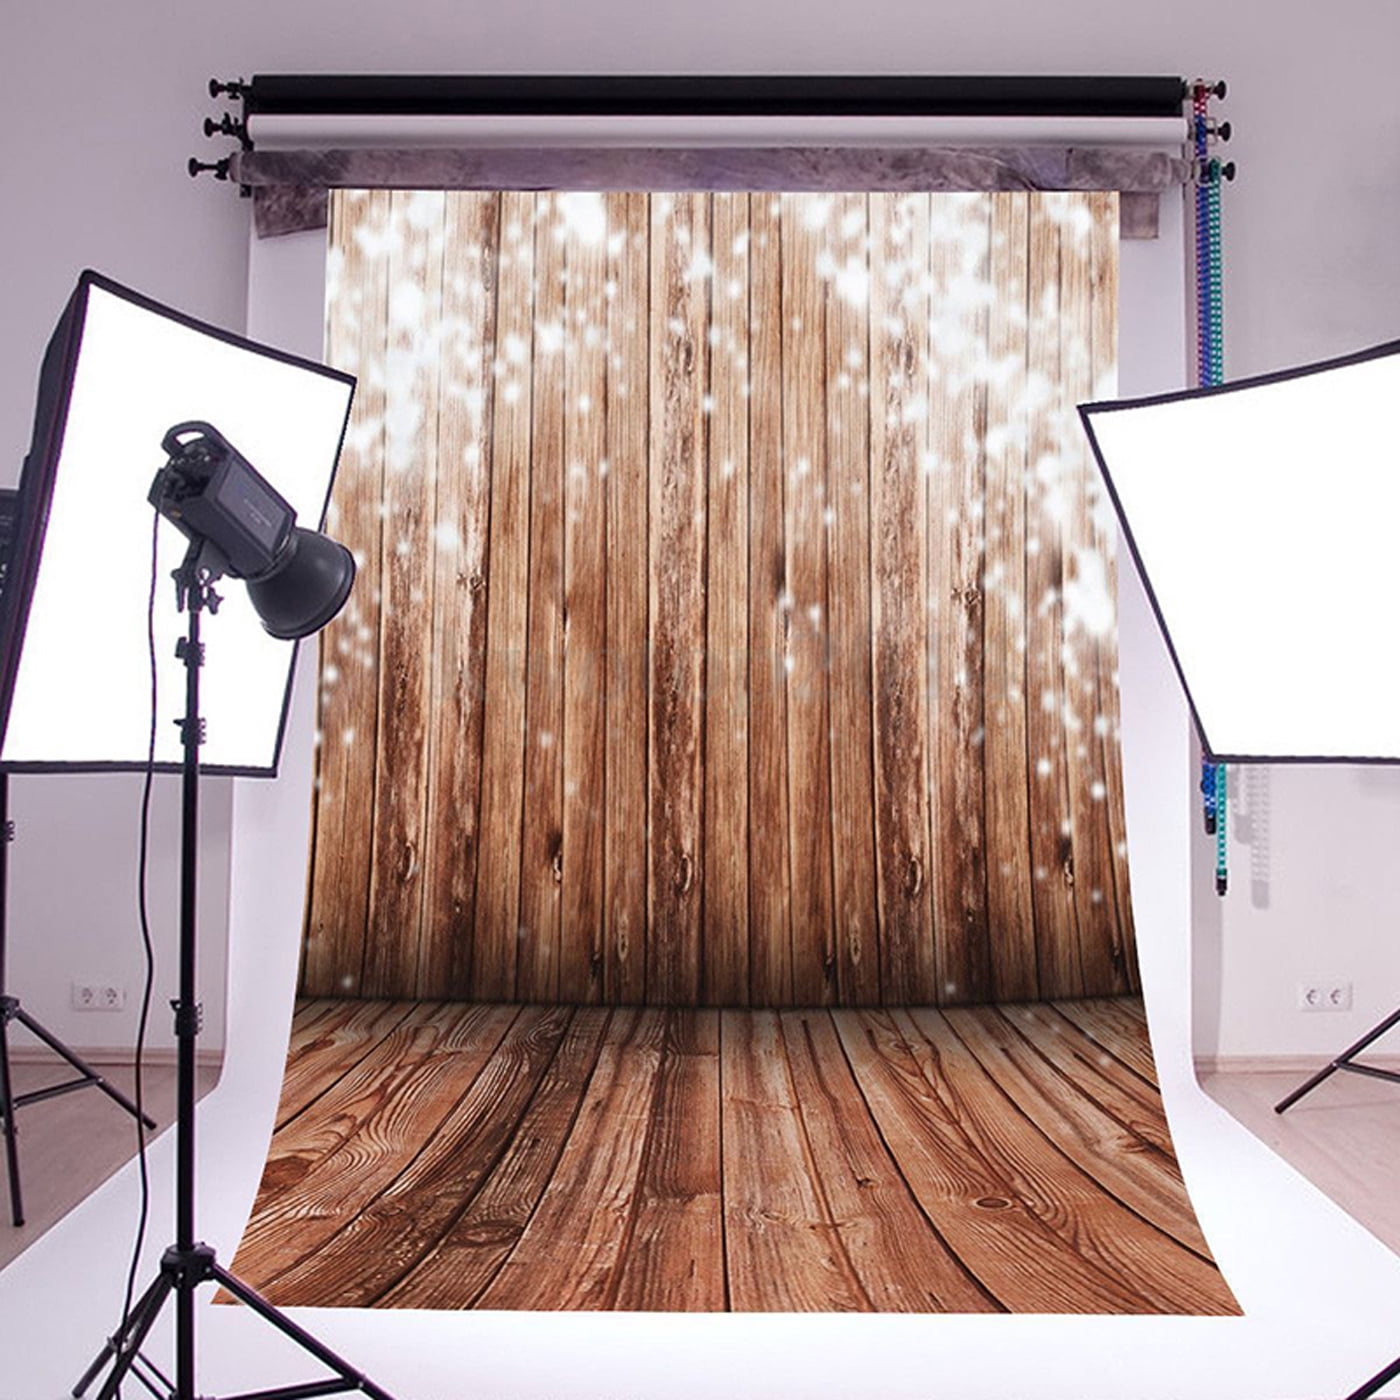 LB Rustic Brown Wood Floor Easter Backdrop for Photography 6x9ft Fabric Green Grass Eggs Spring Background Customized Children Kids Adult Portraits Photo Backdrop Studio Props,Washable 